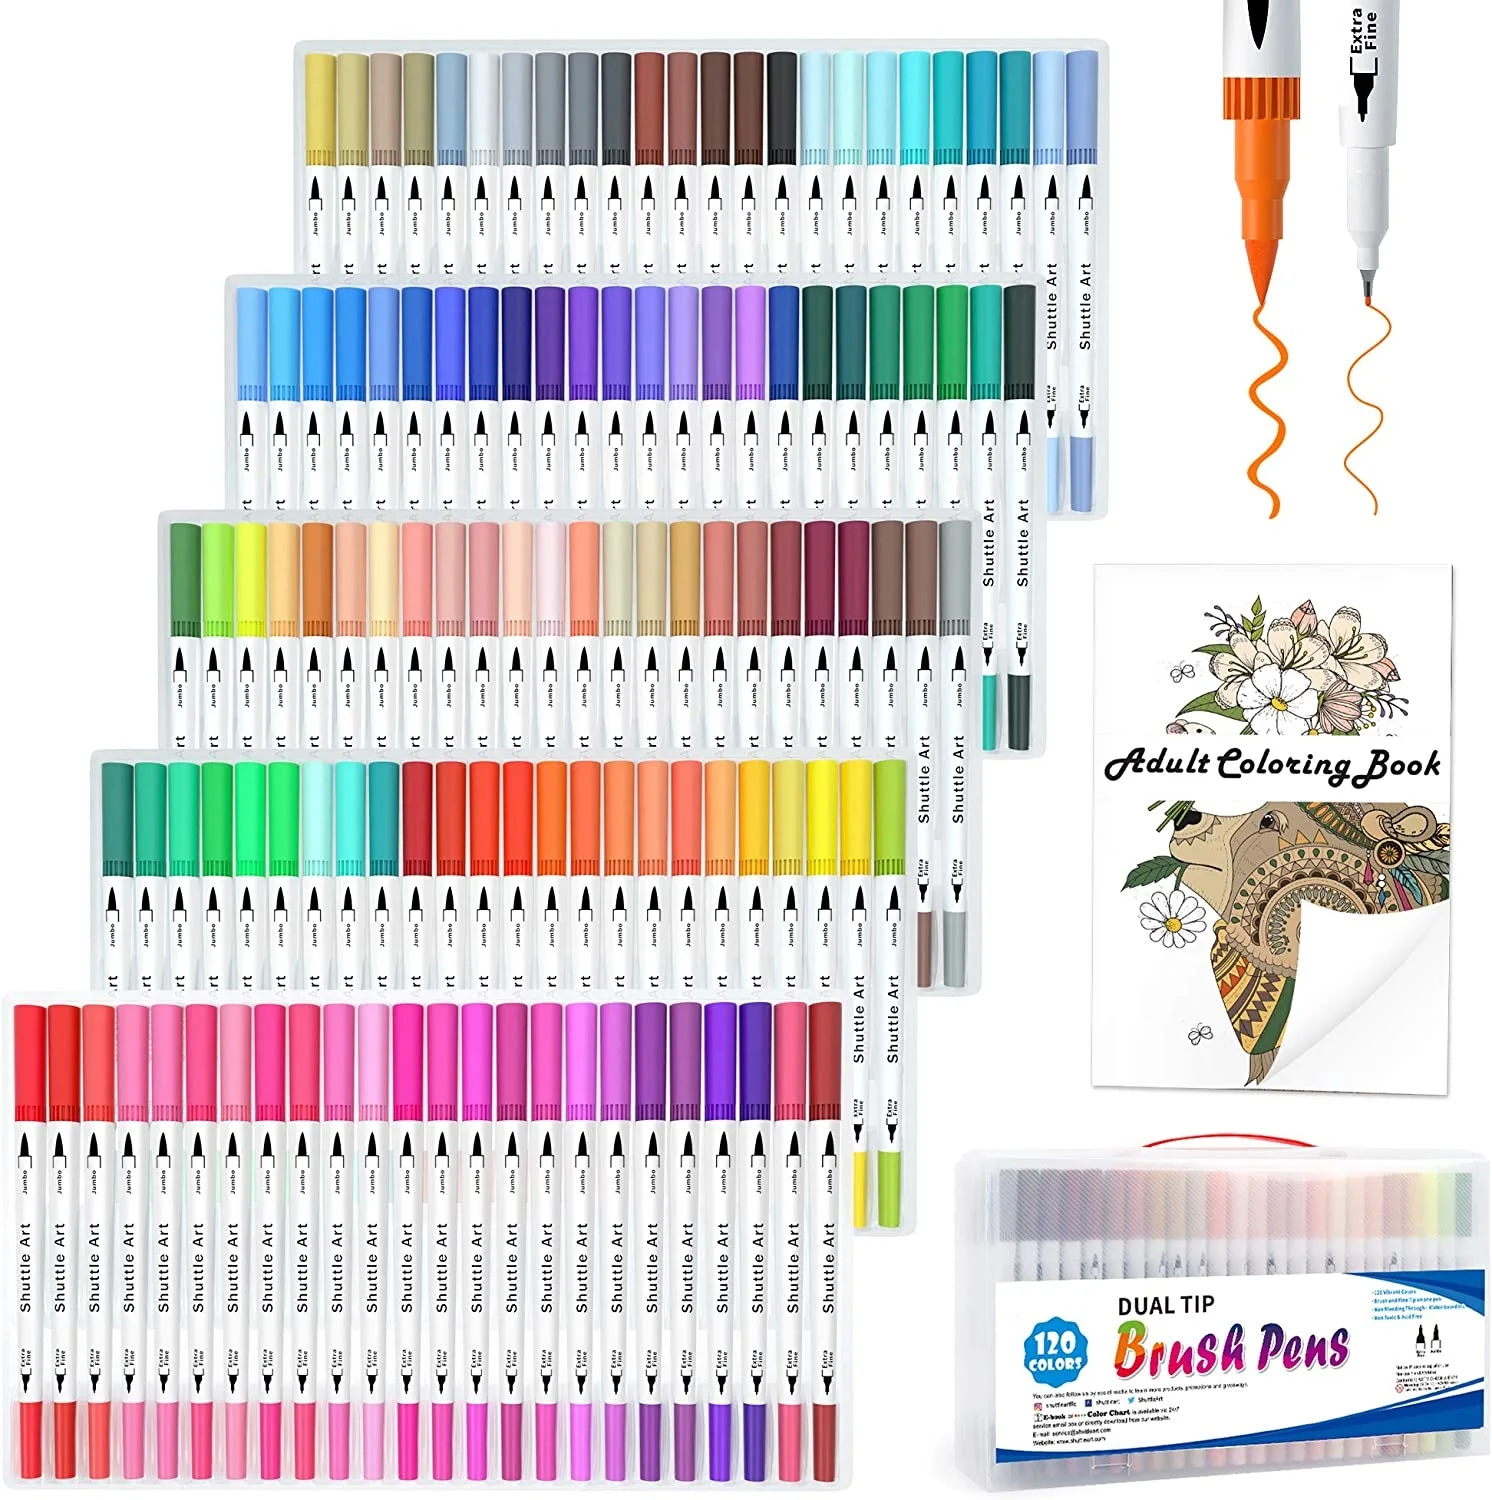 Soucolor 60 Colors Dual Tip Brush Pens with Fineliner Tip 0.4 Art